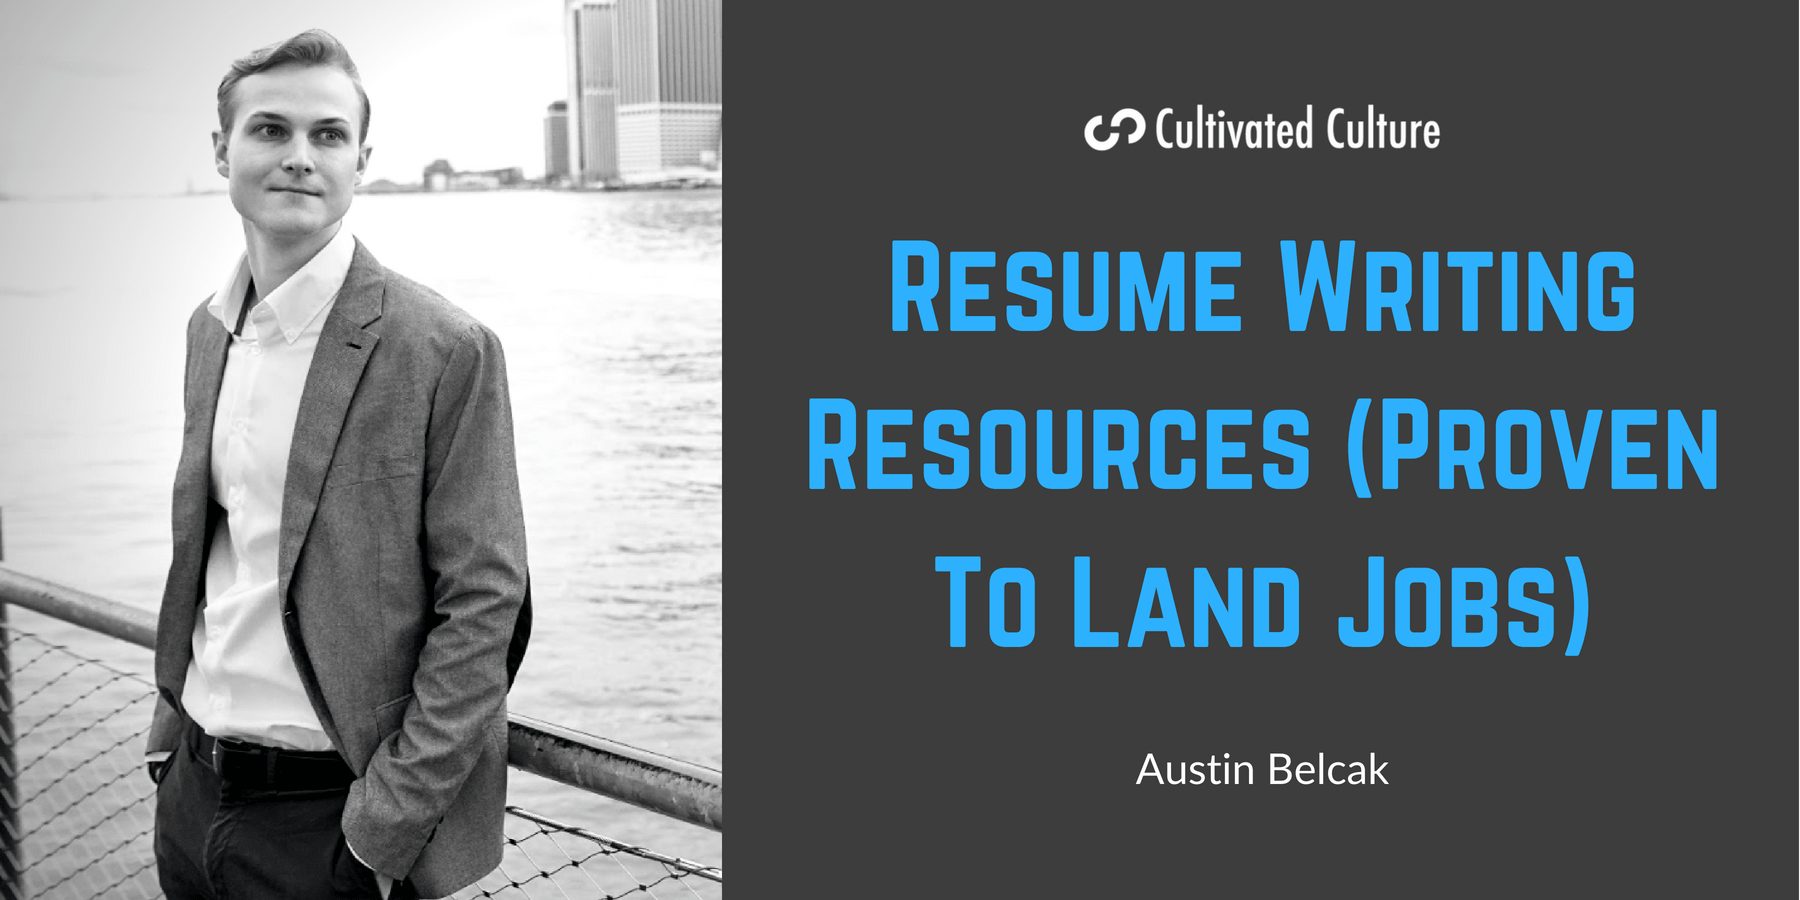 Resume Writing Resources - Cultivated Culture